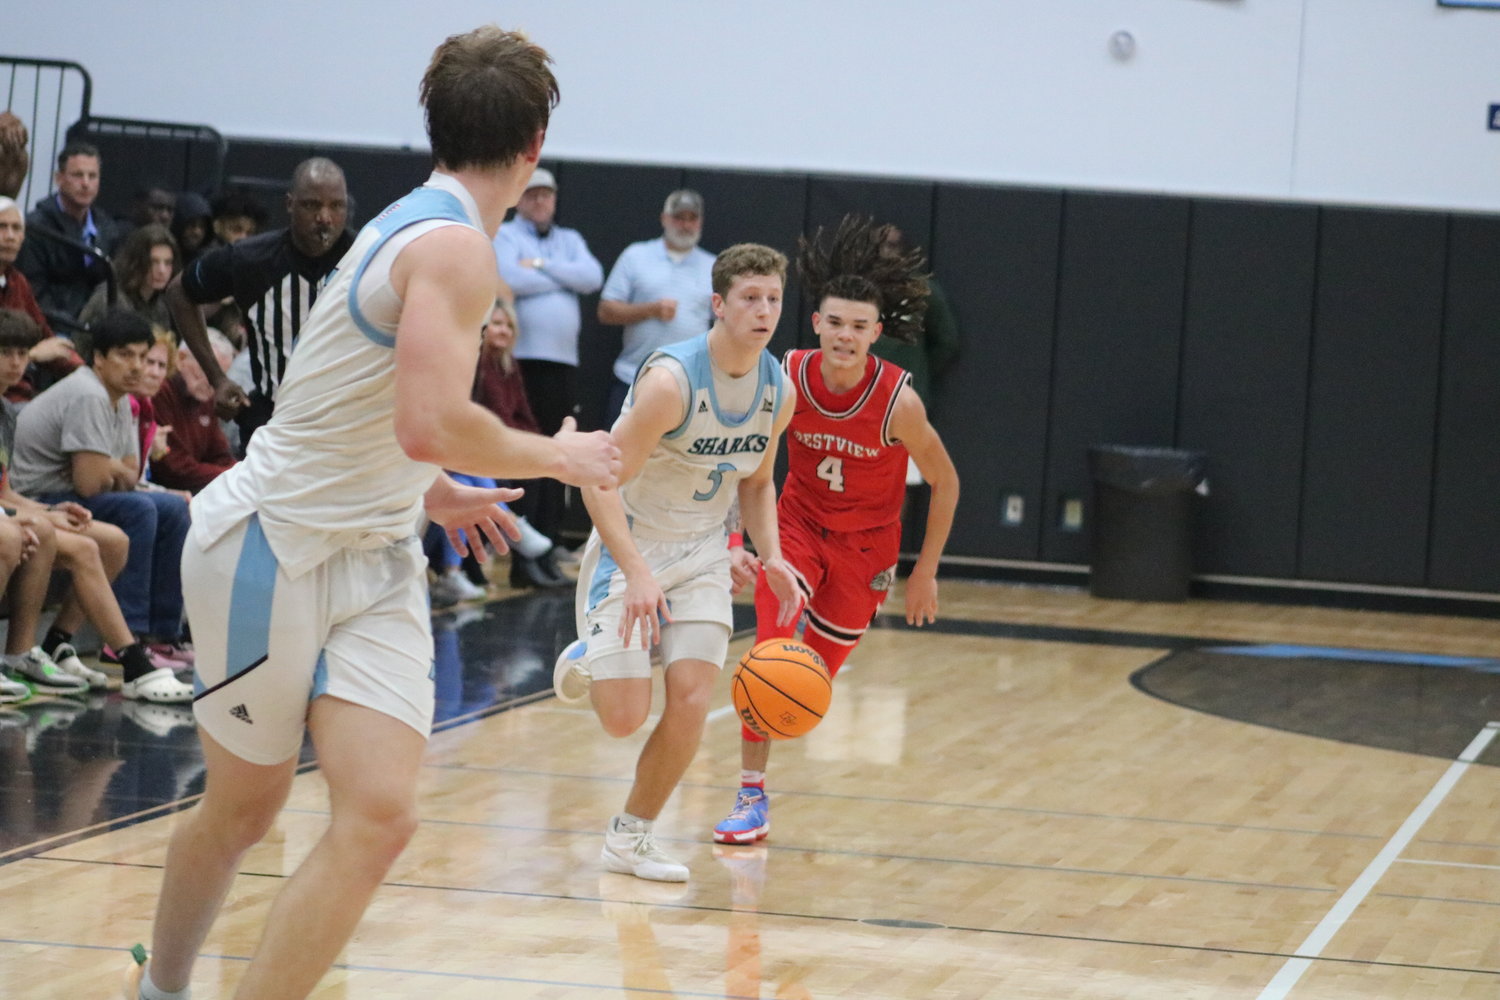 Crestview defenders chasing Ponte Vedra guard Nate Bunkosky was a popular sight throughout the game.